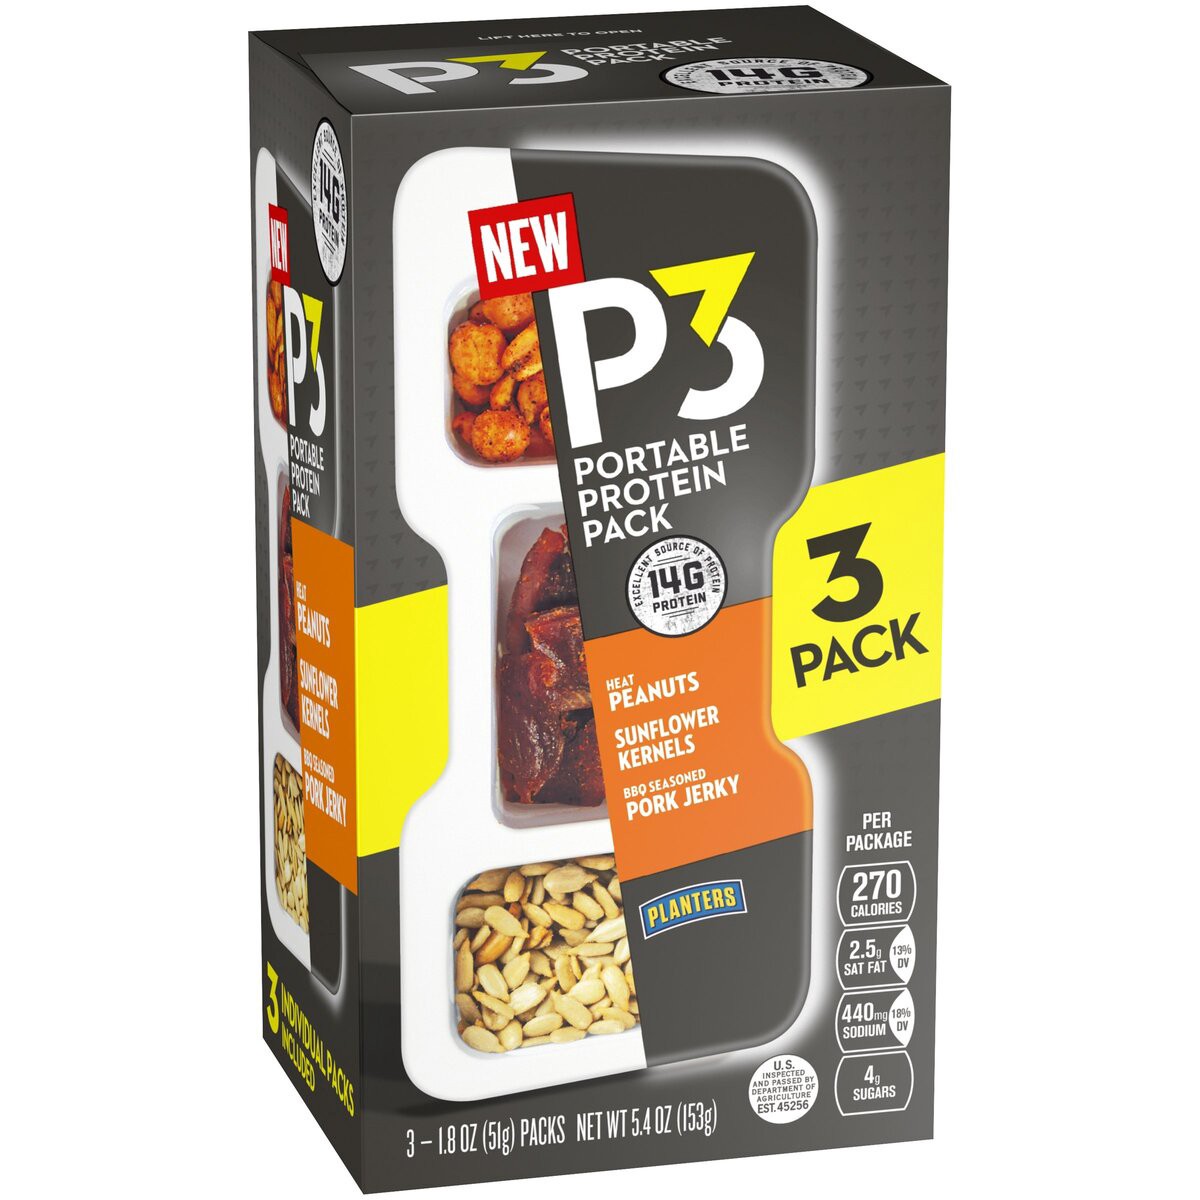 slide 2 of 8, P3 Portable Protein Snack Pack with Heat Peanuts, Sunflower Kernels & BBQ Seasoned Pork Jerky Trays, 5.4 oz